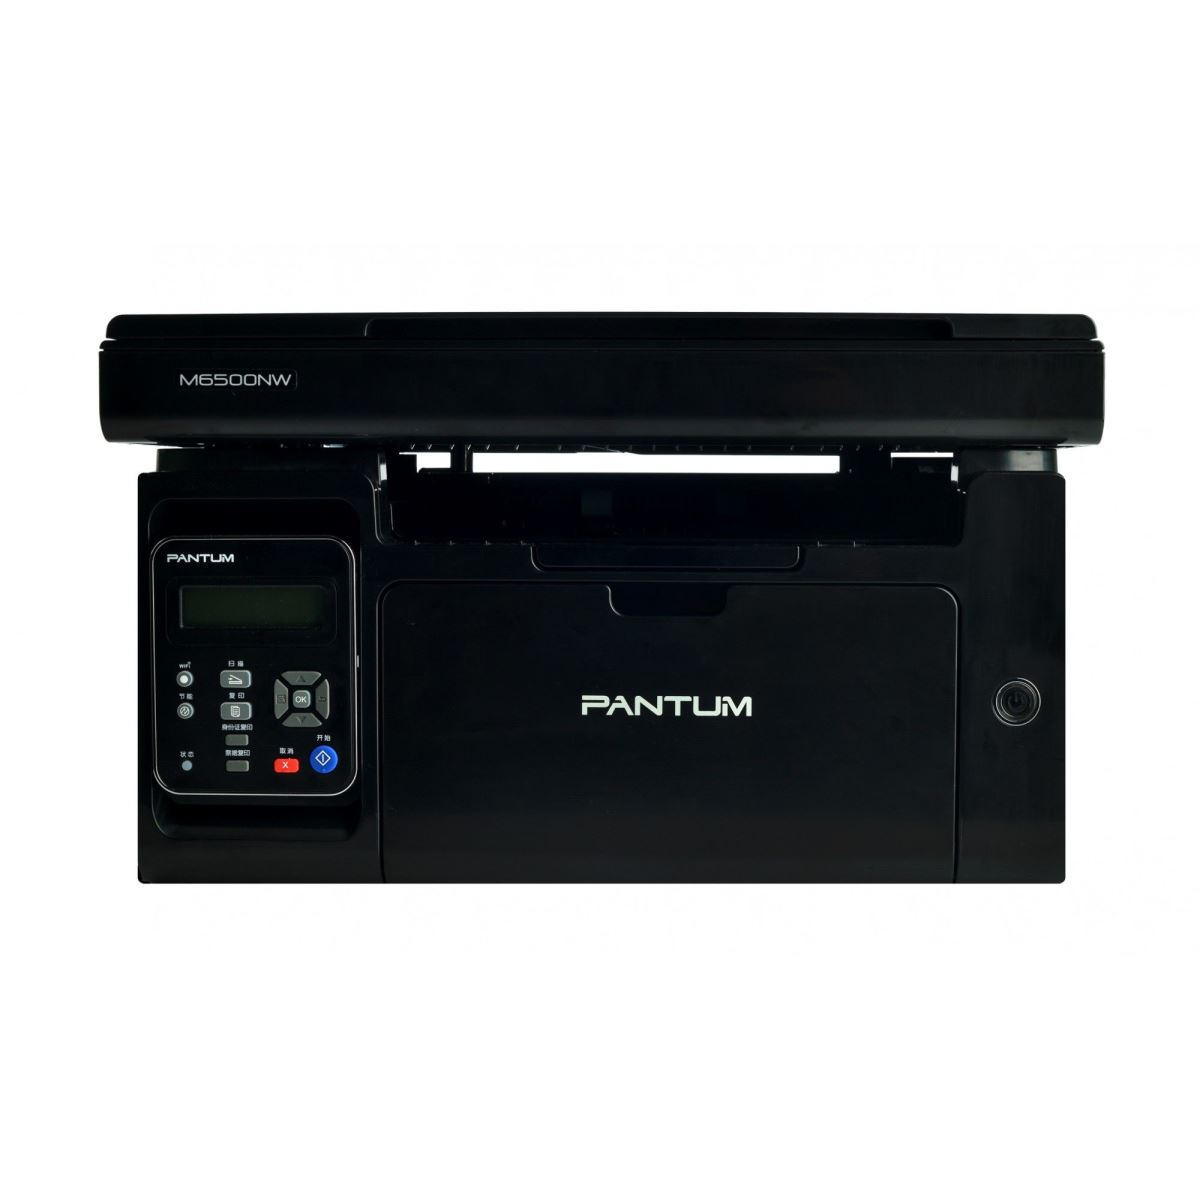 Multifunctional Pantum M6500NW, laser monocrom, A4, WiFi and Mobile Printing